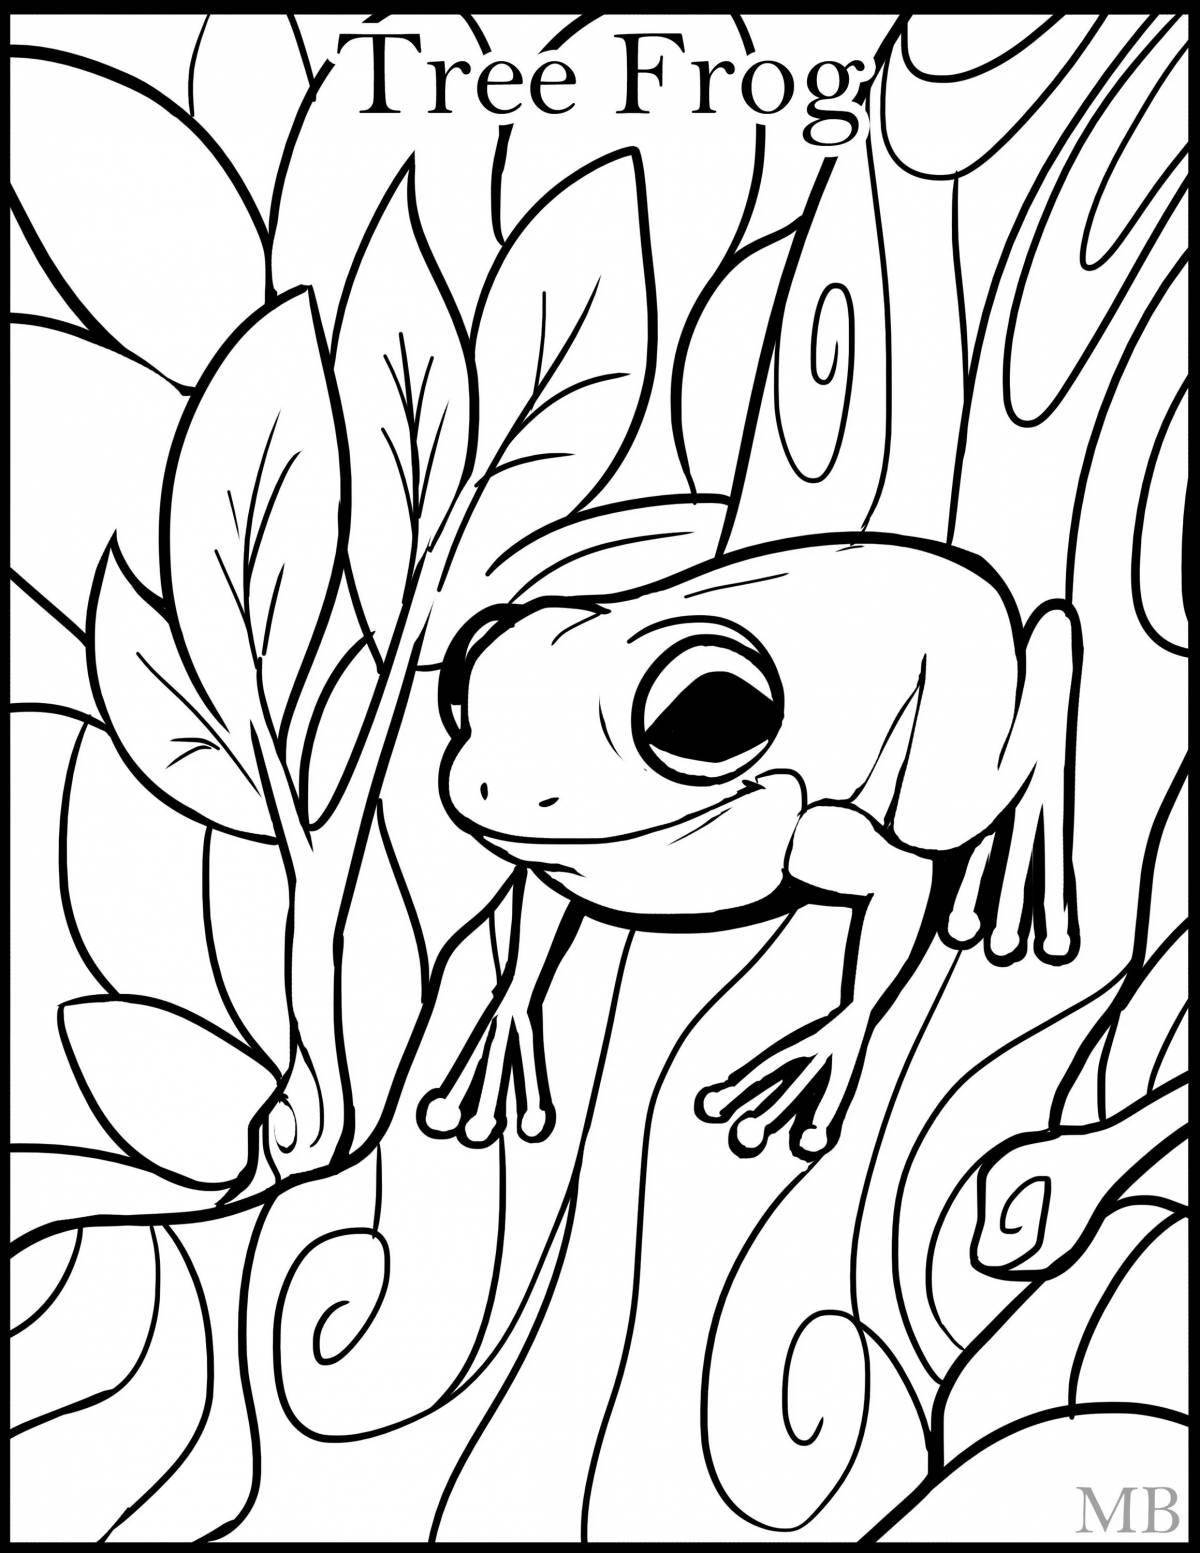 Coloring bright frog